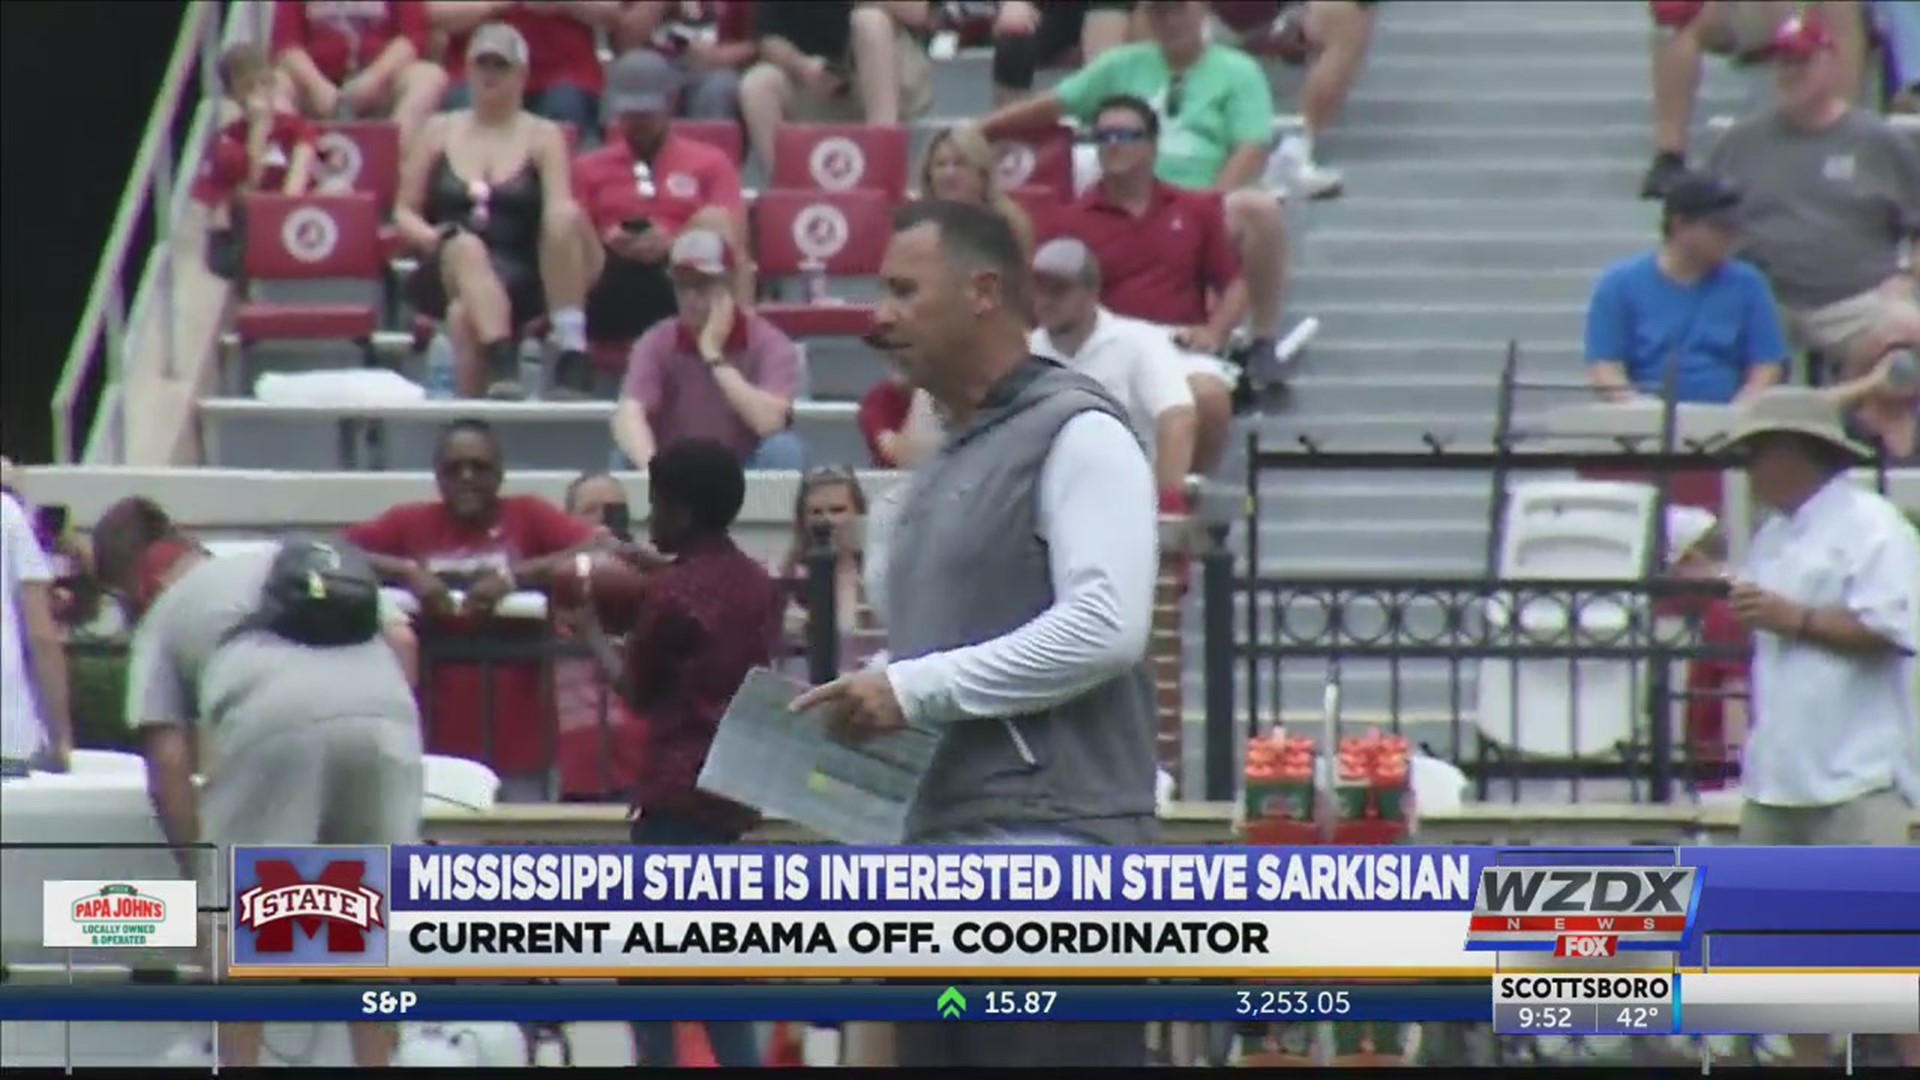 According to Football Scoop and other reports, Alabama offensive coordinator Steve Sarkisian is now a significant candidate for the Mississippi State head football coach  position.